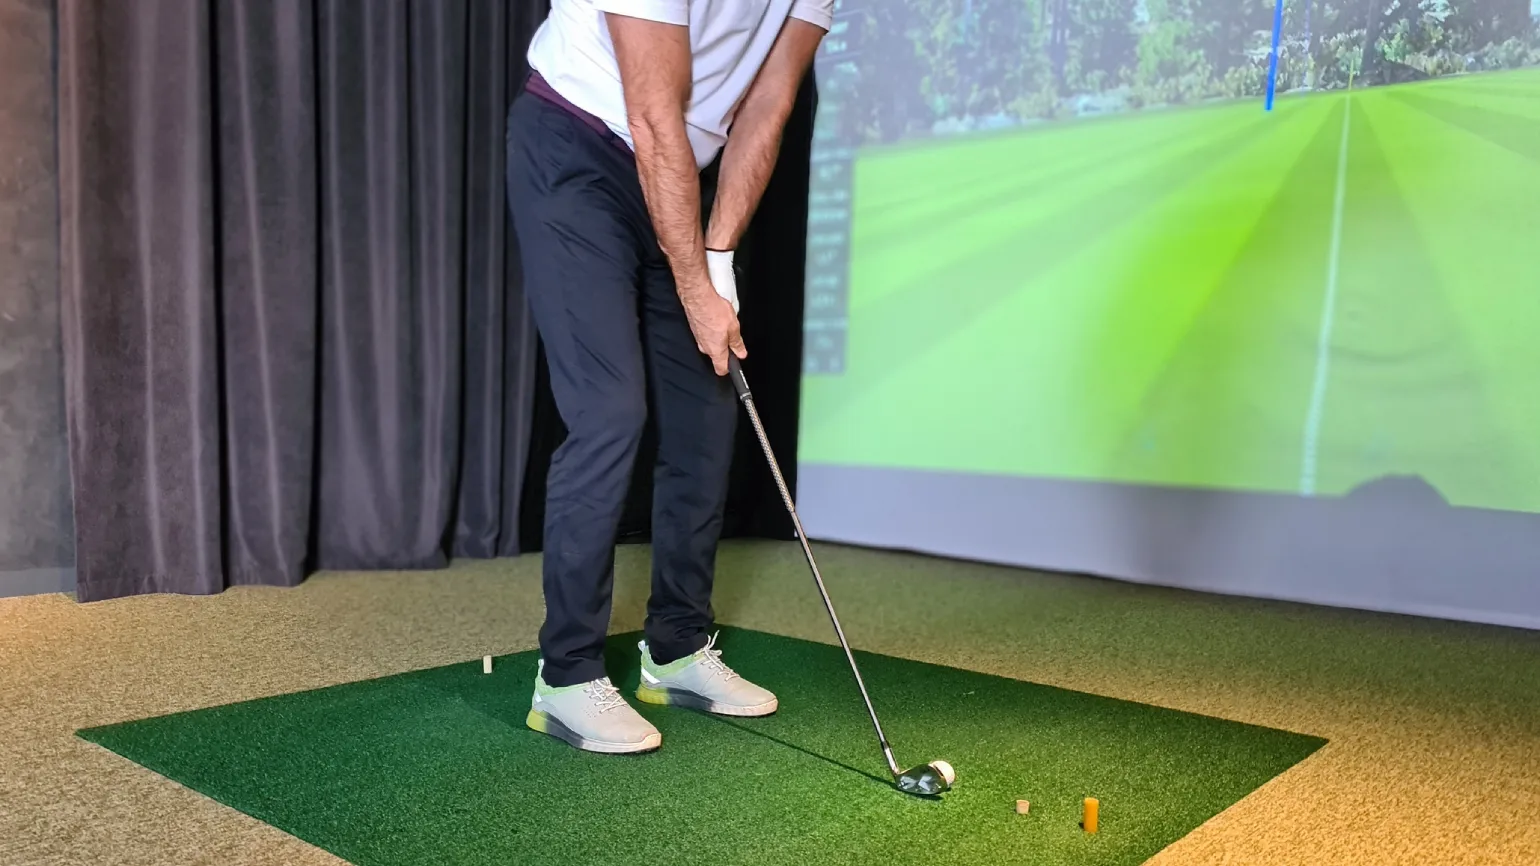 Golf Simulator and Coworking Business and Operations - How to setup